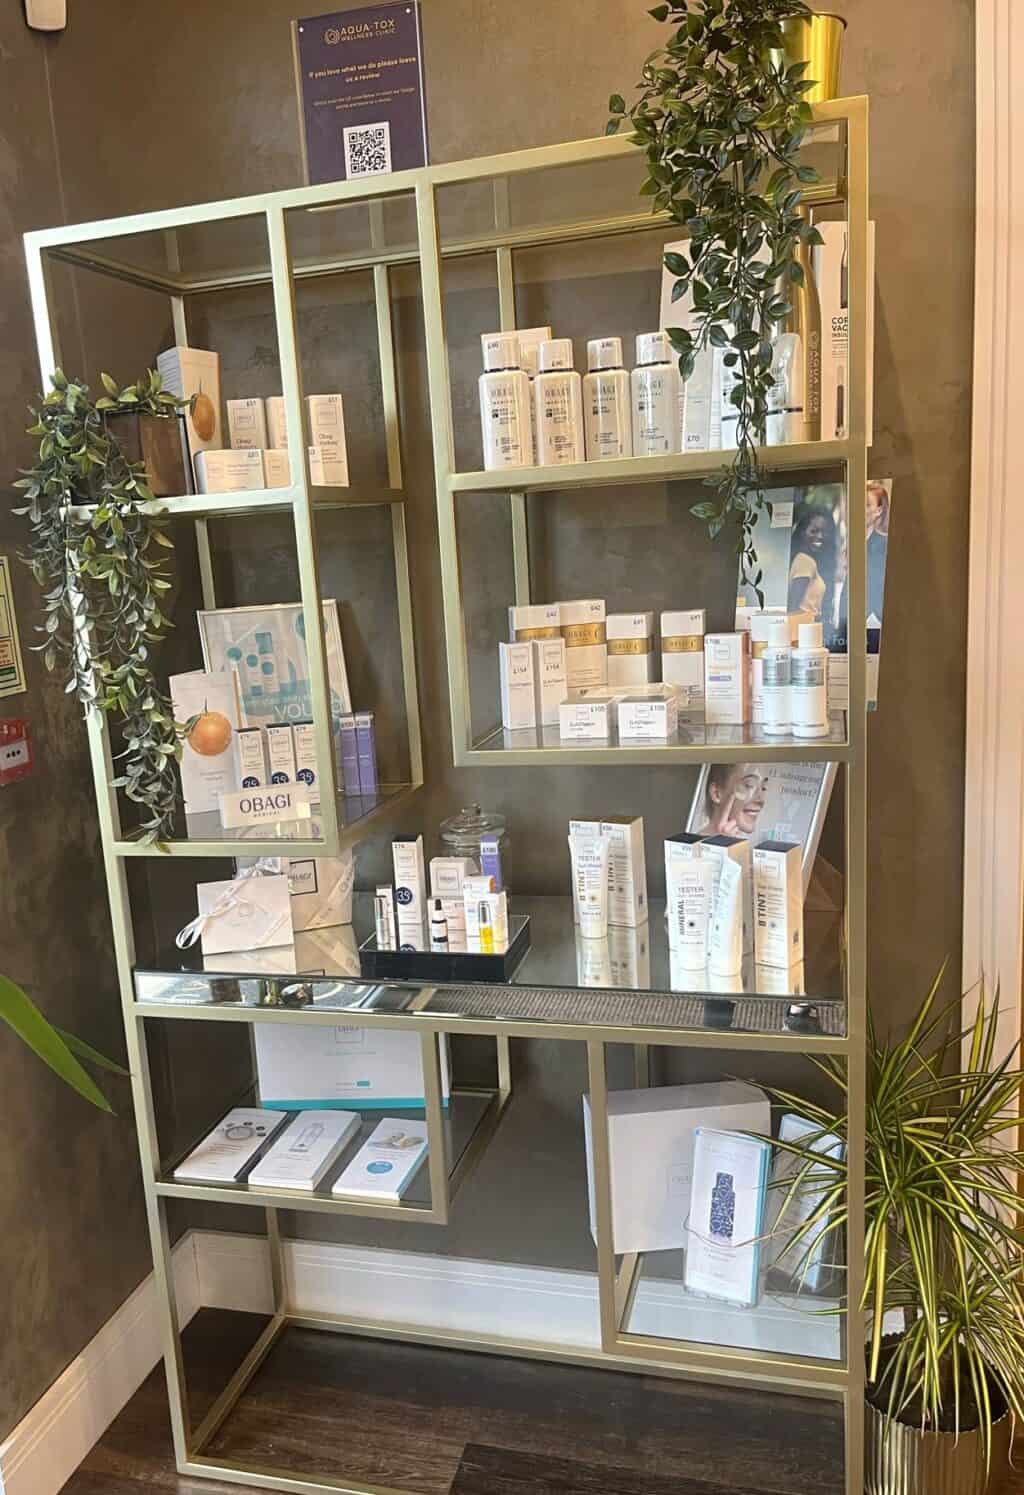 a display of Obagi Medical skincare products at aqua tox wellness clinic in hertford